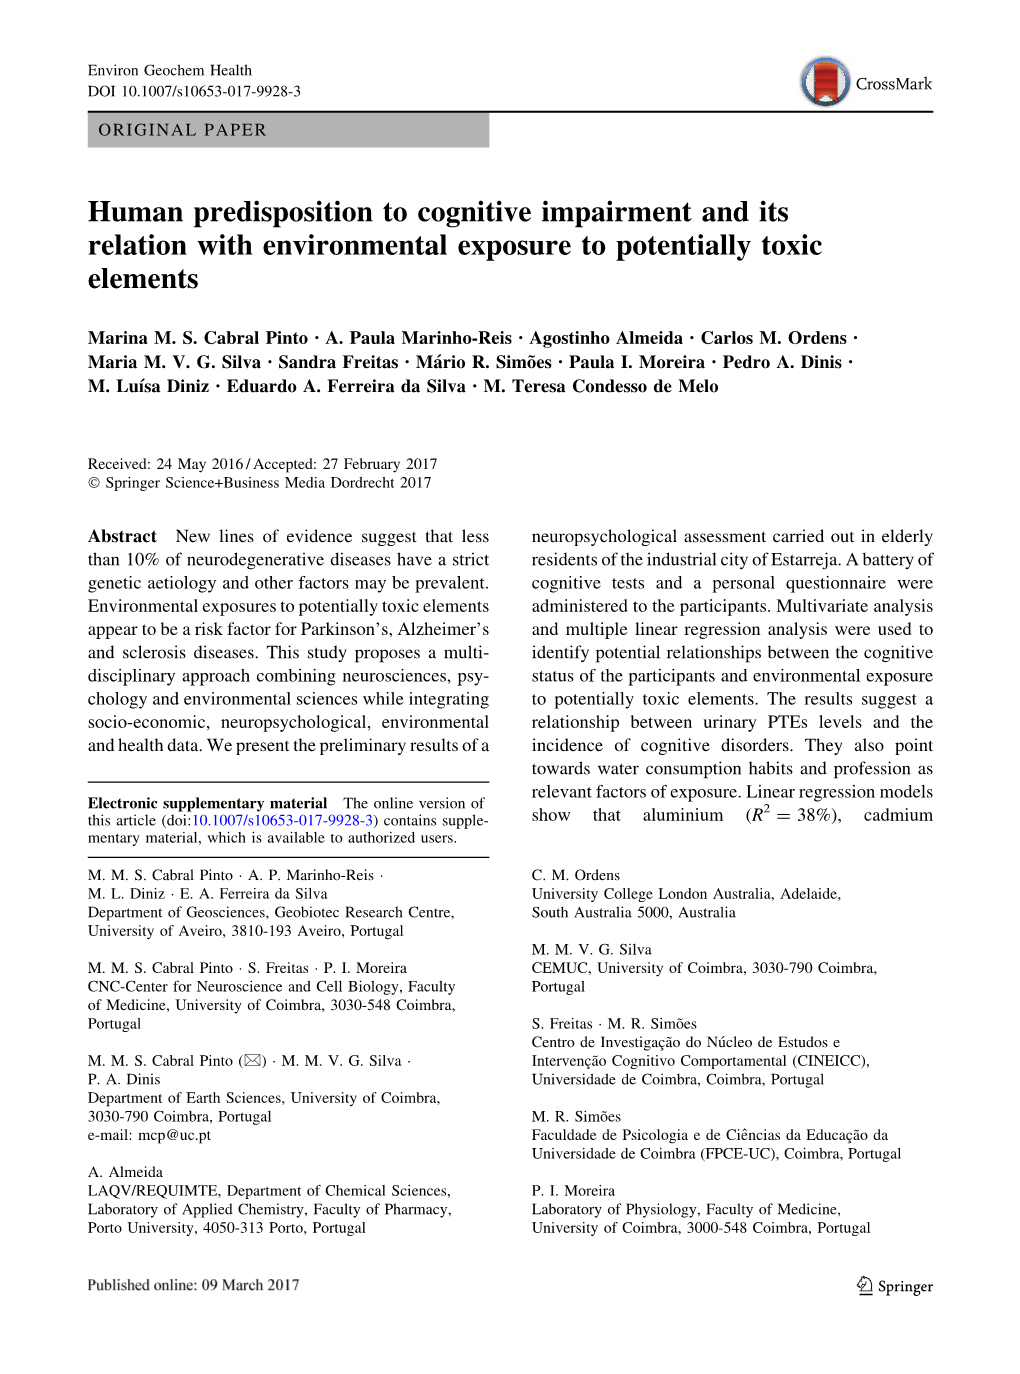 Human Predisposition to Cognitive Impairment and Its Relation with Environmental Exposure to Potentially Toxic Elements